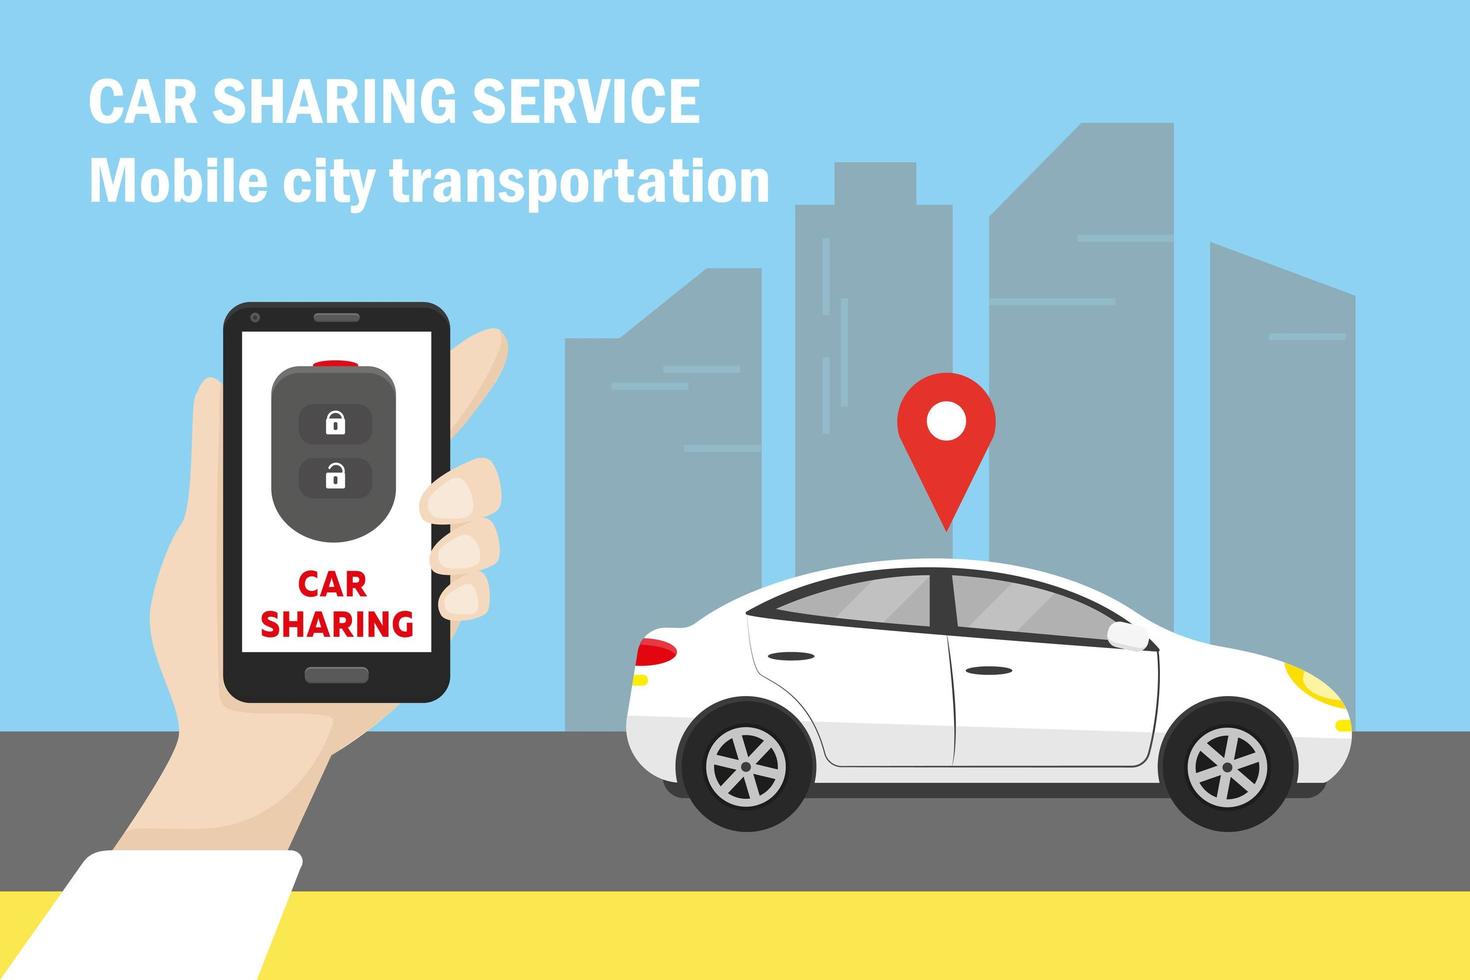 Car sharing and mobile city transportation concept. White car in the city and hand holding smartphone with car key on the screen. Vector illustration.